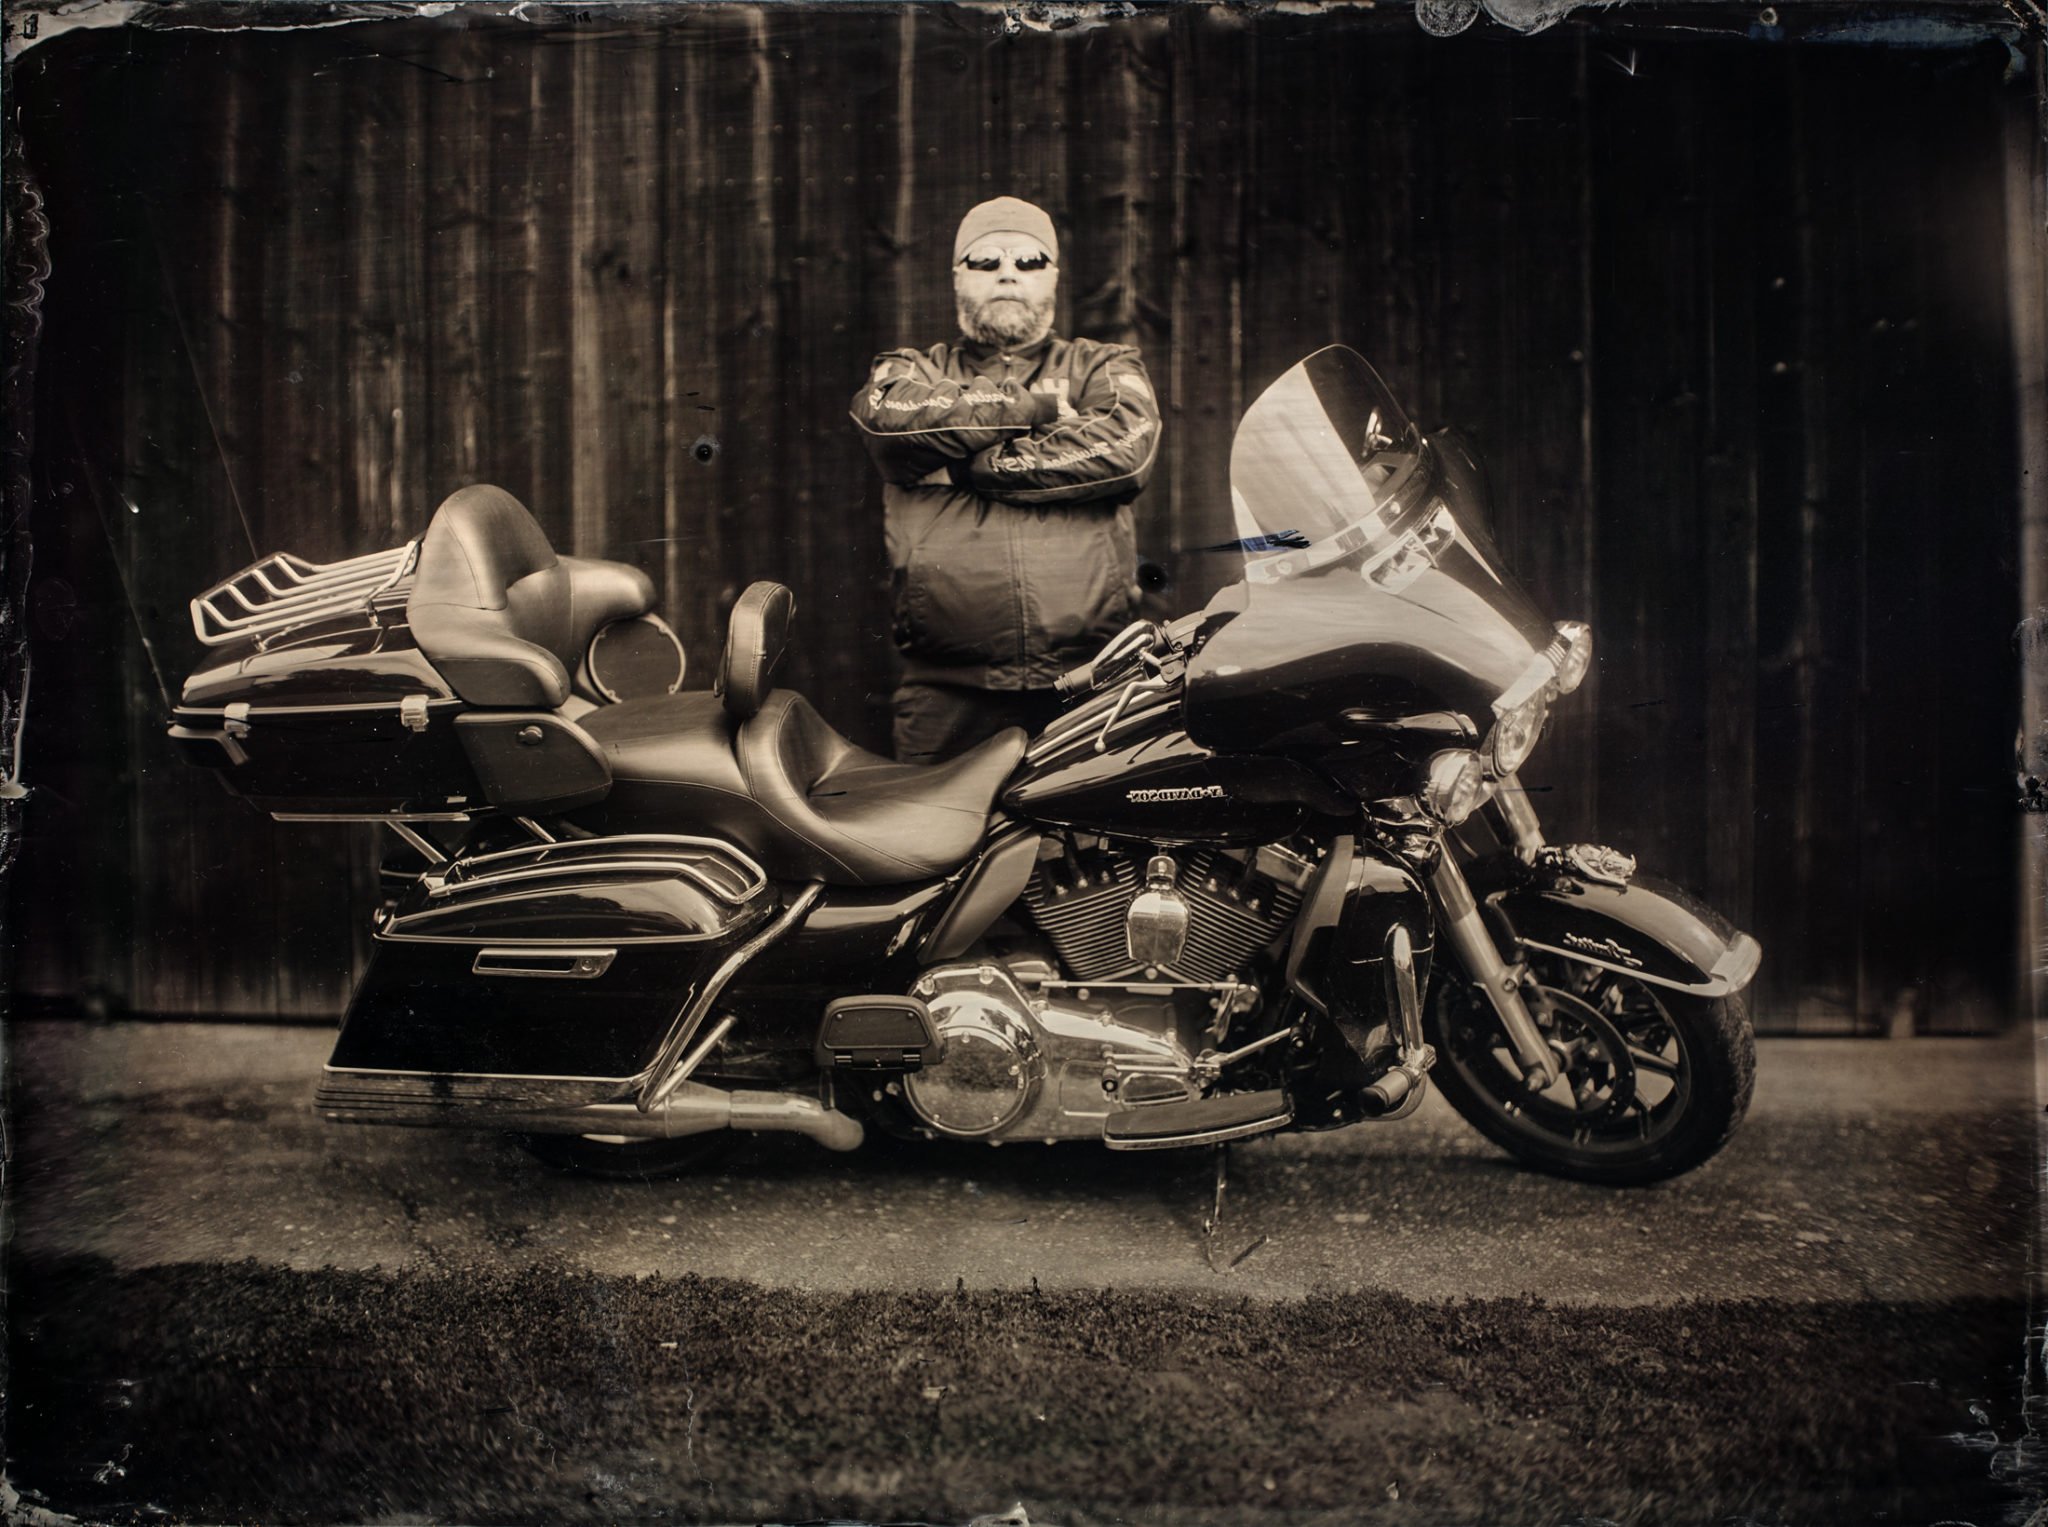 A 6000W Light Meets Harley Davidson and a 12 × 16 inch Wet Plate